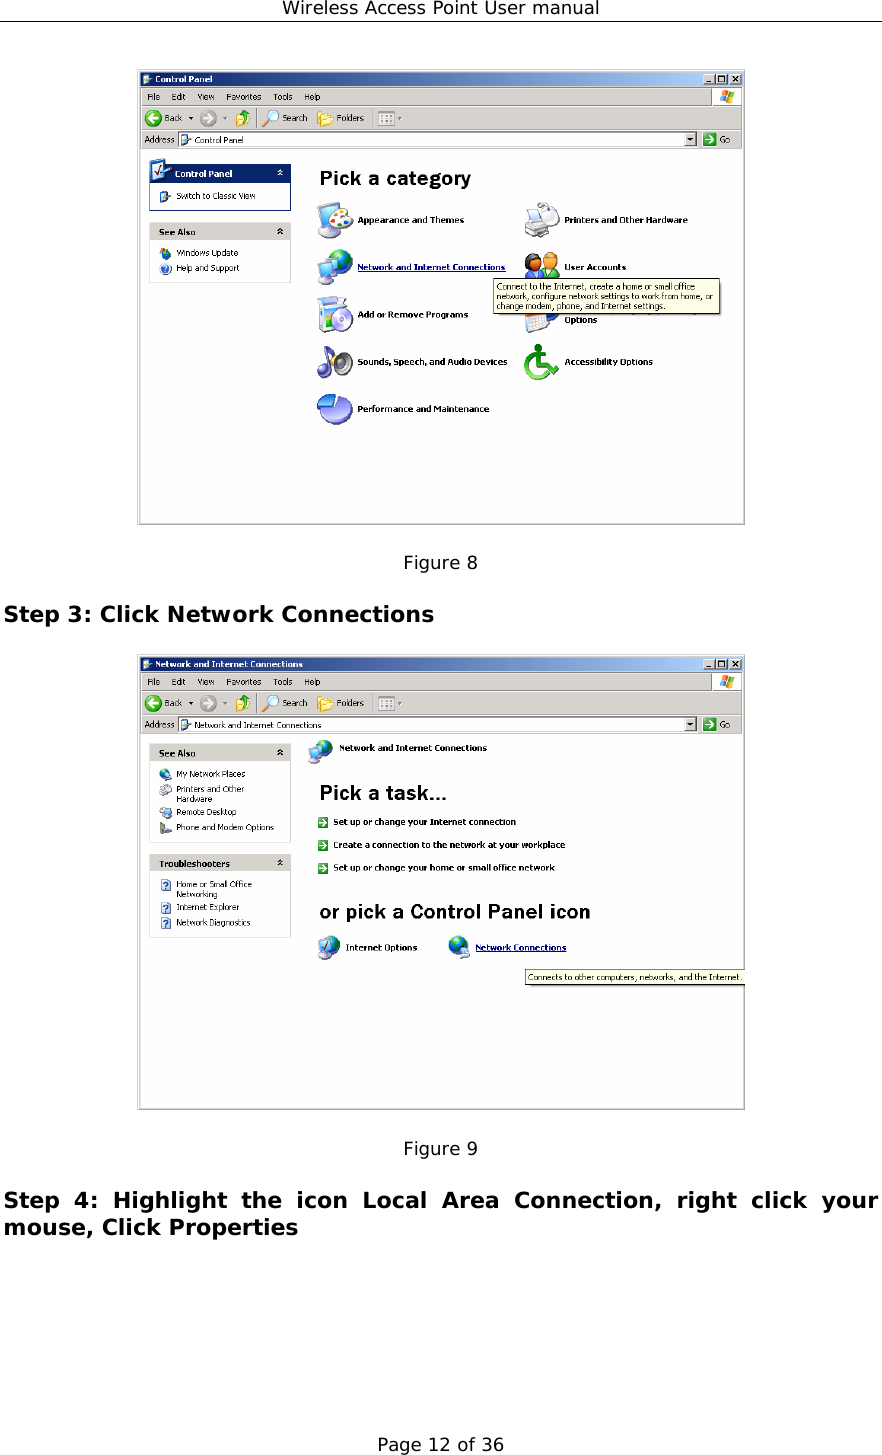 Wireless Access Point User manual Page 12 of 36   Figure 8  Step 3: Click Network Connections    Figure 9  Step 4: Highlight the icon Local Area Connection, right click your mouse, Click Properties 